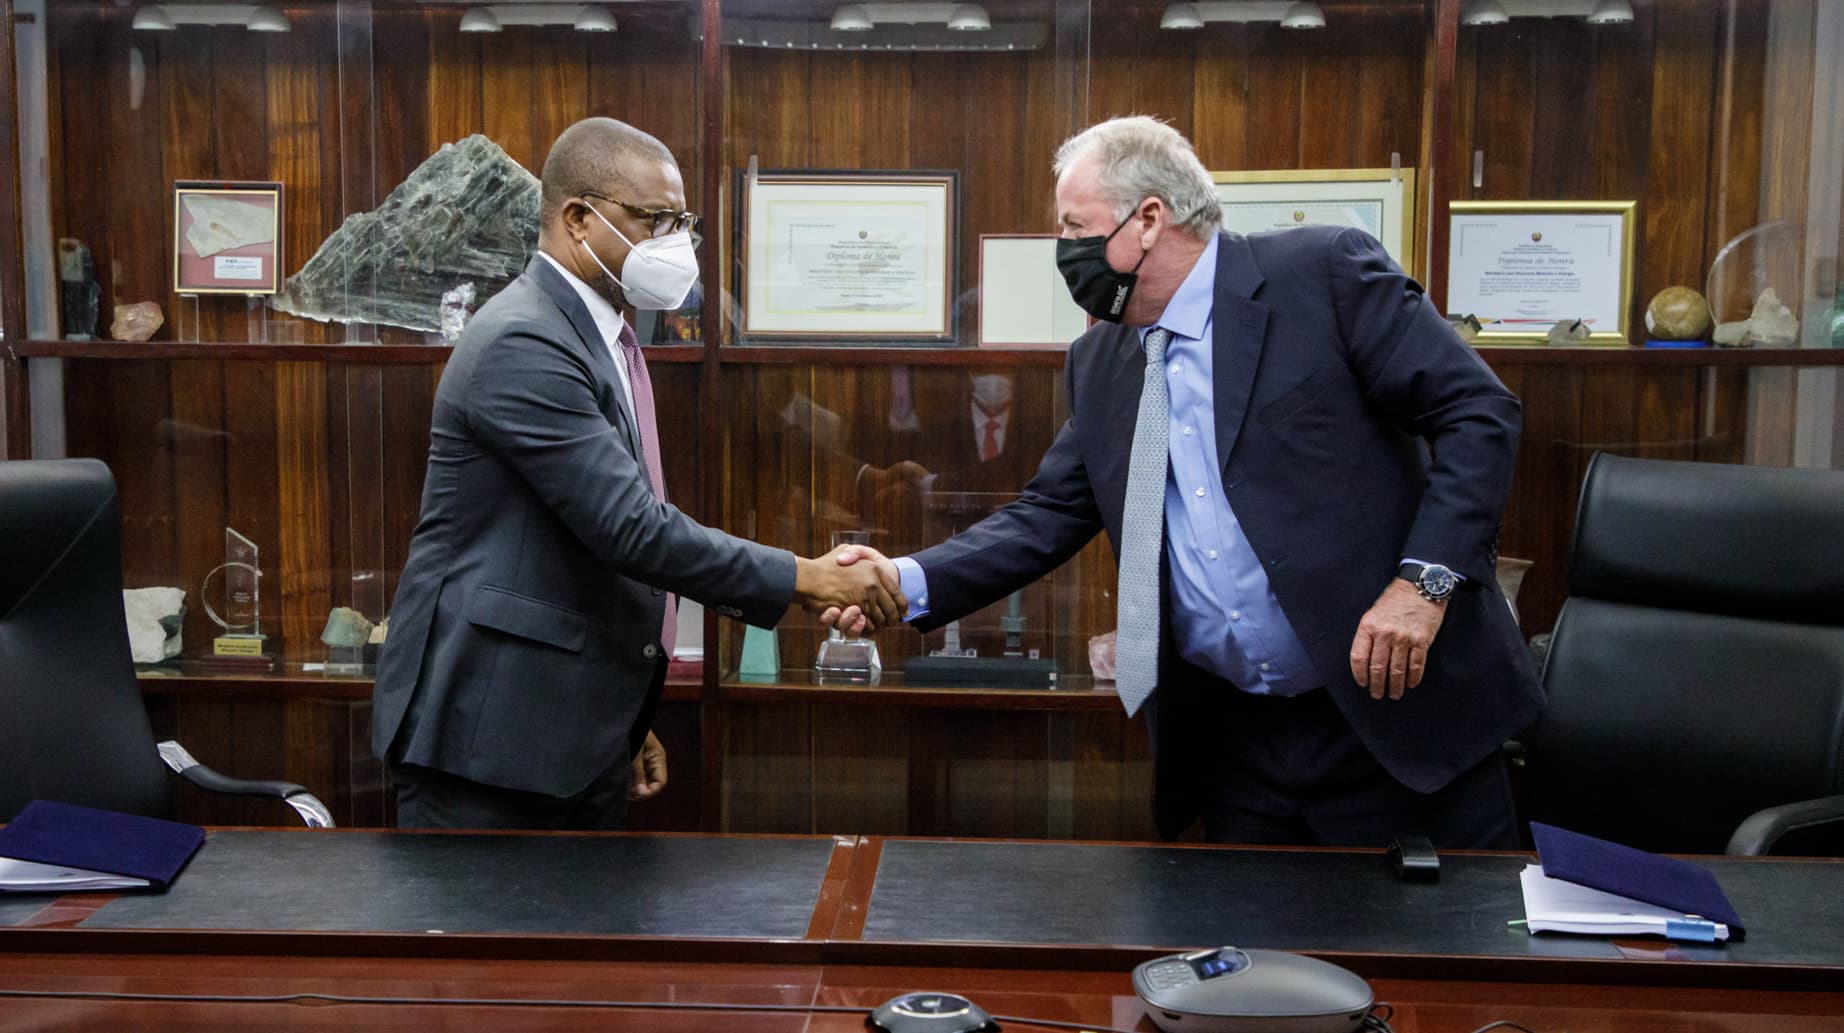 GL Energy Moçambique signs concessions agreement with the Government of Mozambique for 250MW LNG Power Plant